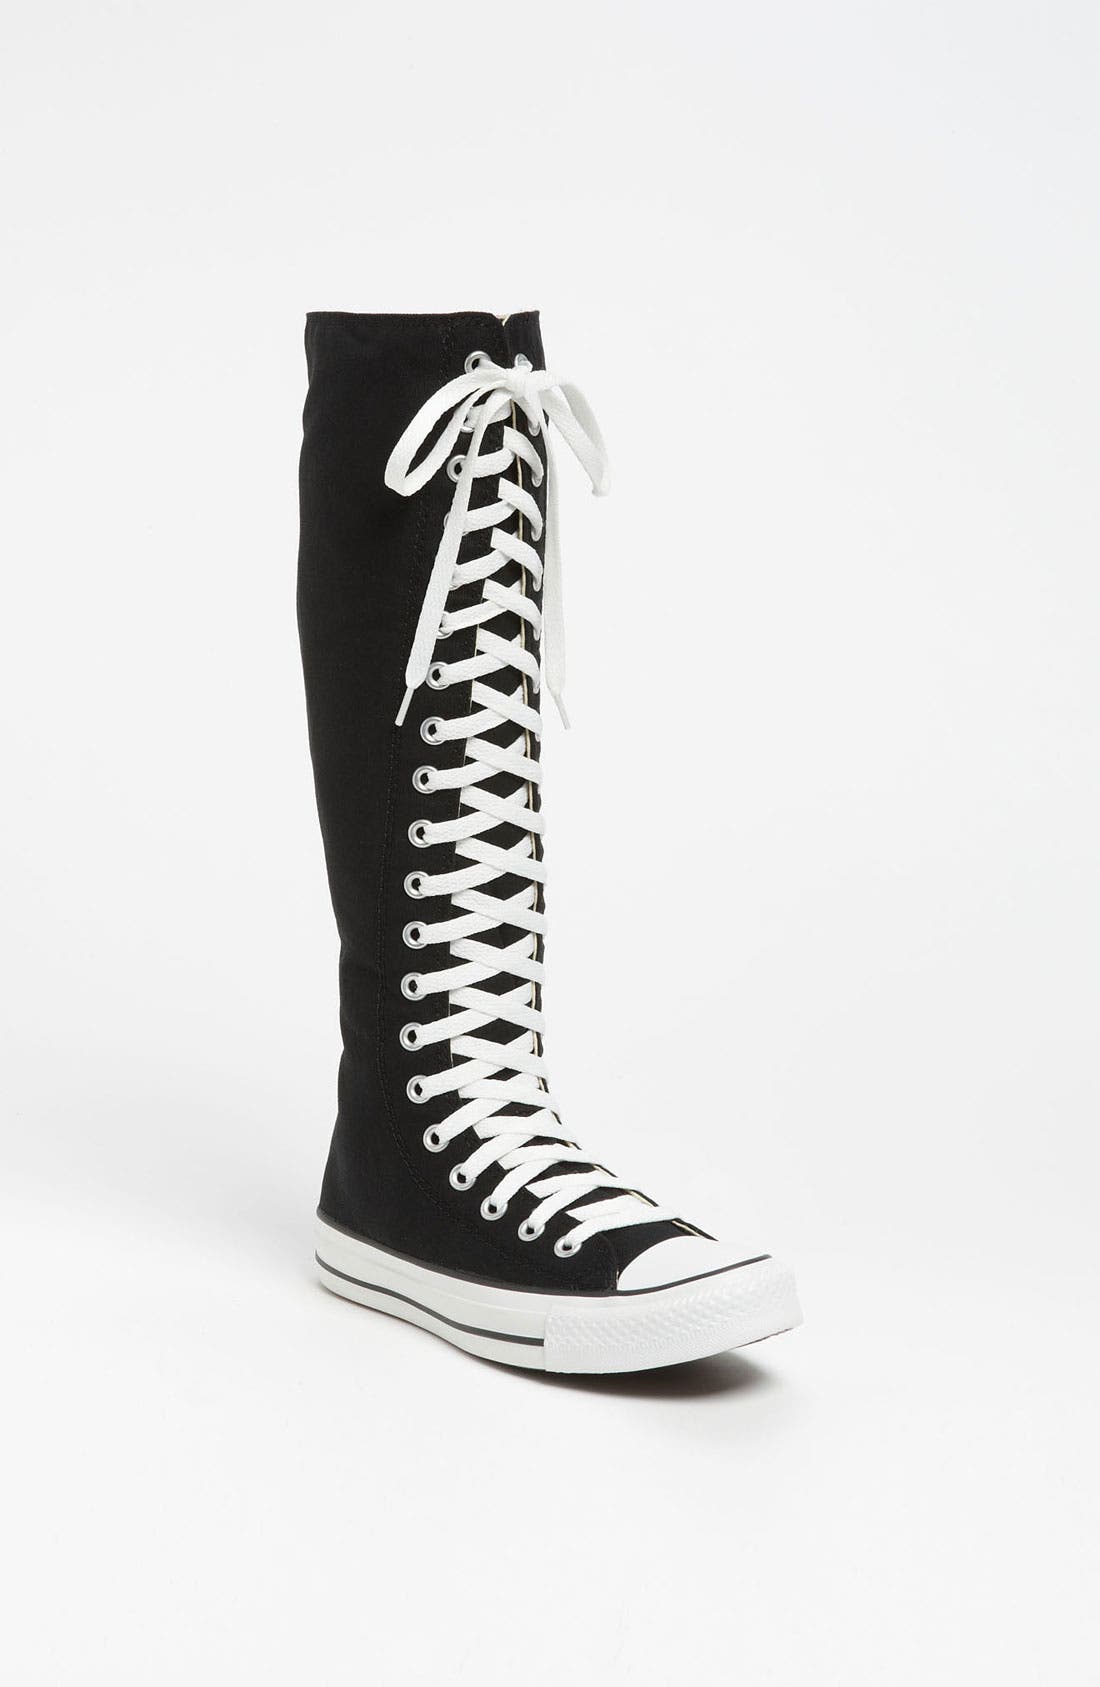 thigh high converse sneakers